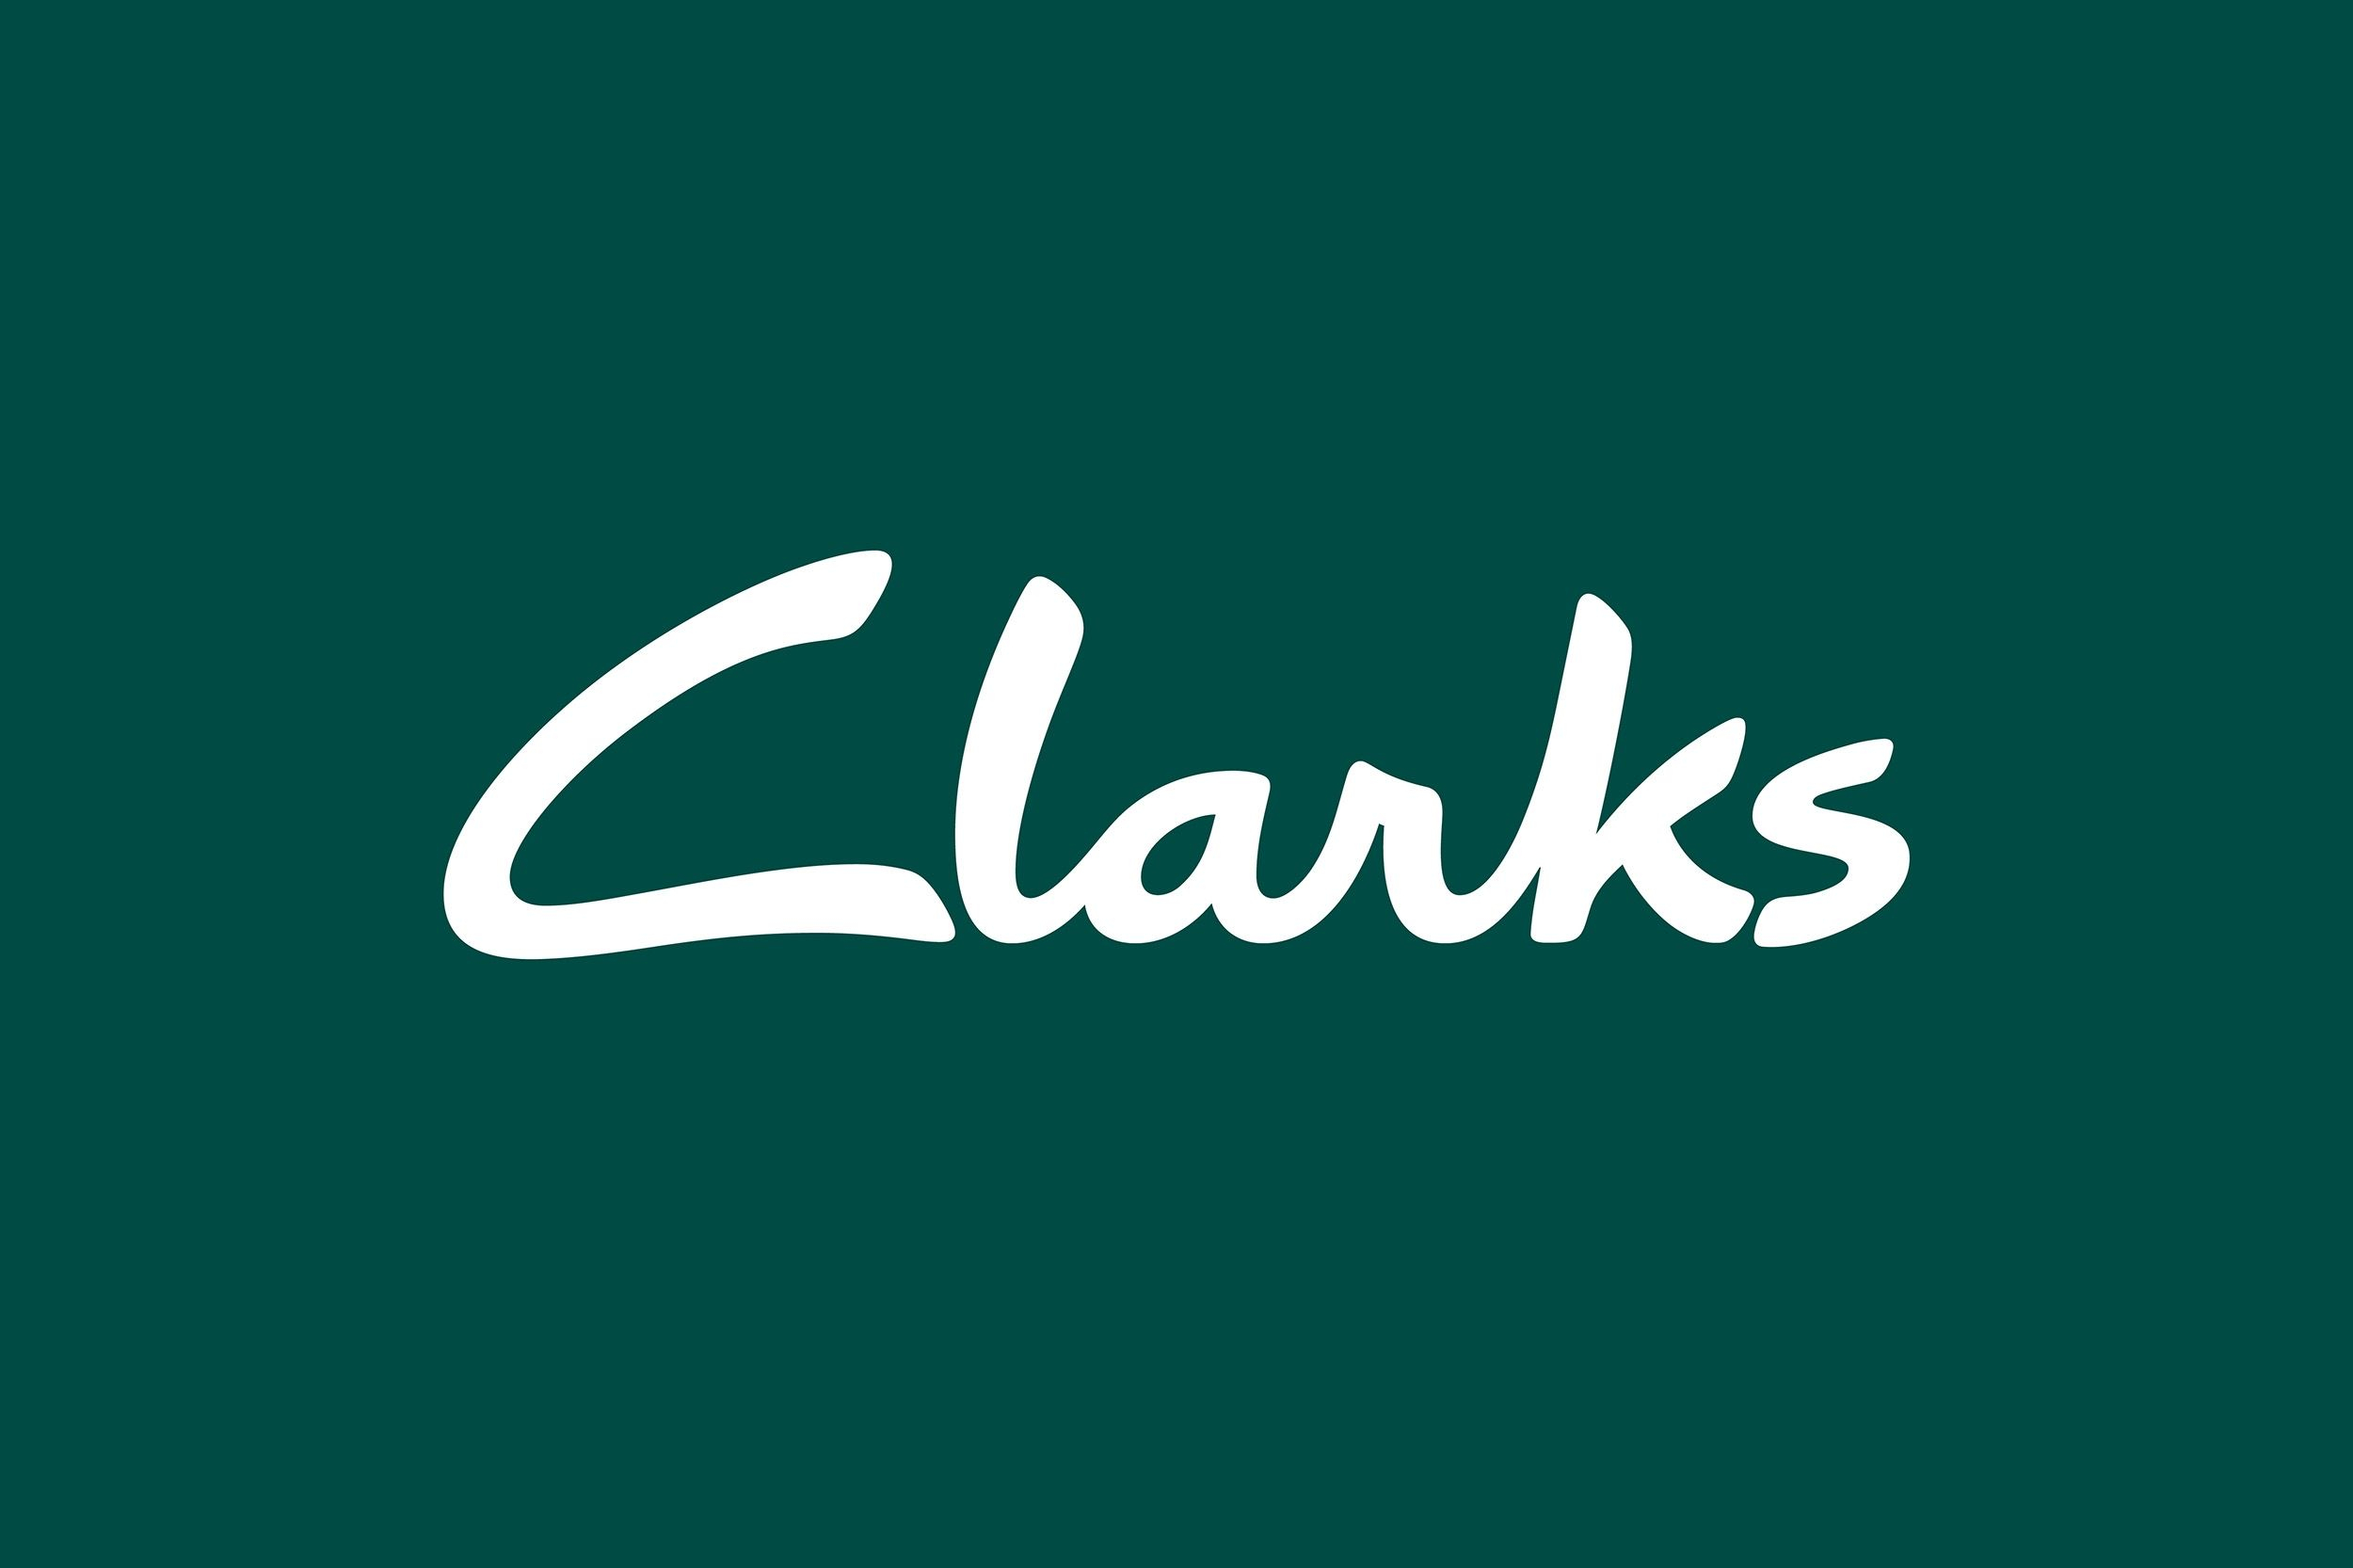 clarks promotional codes 2019